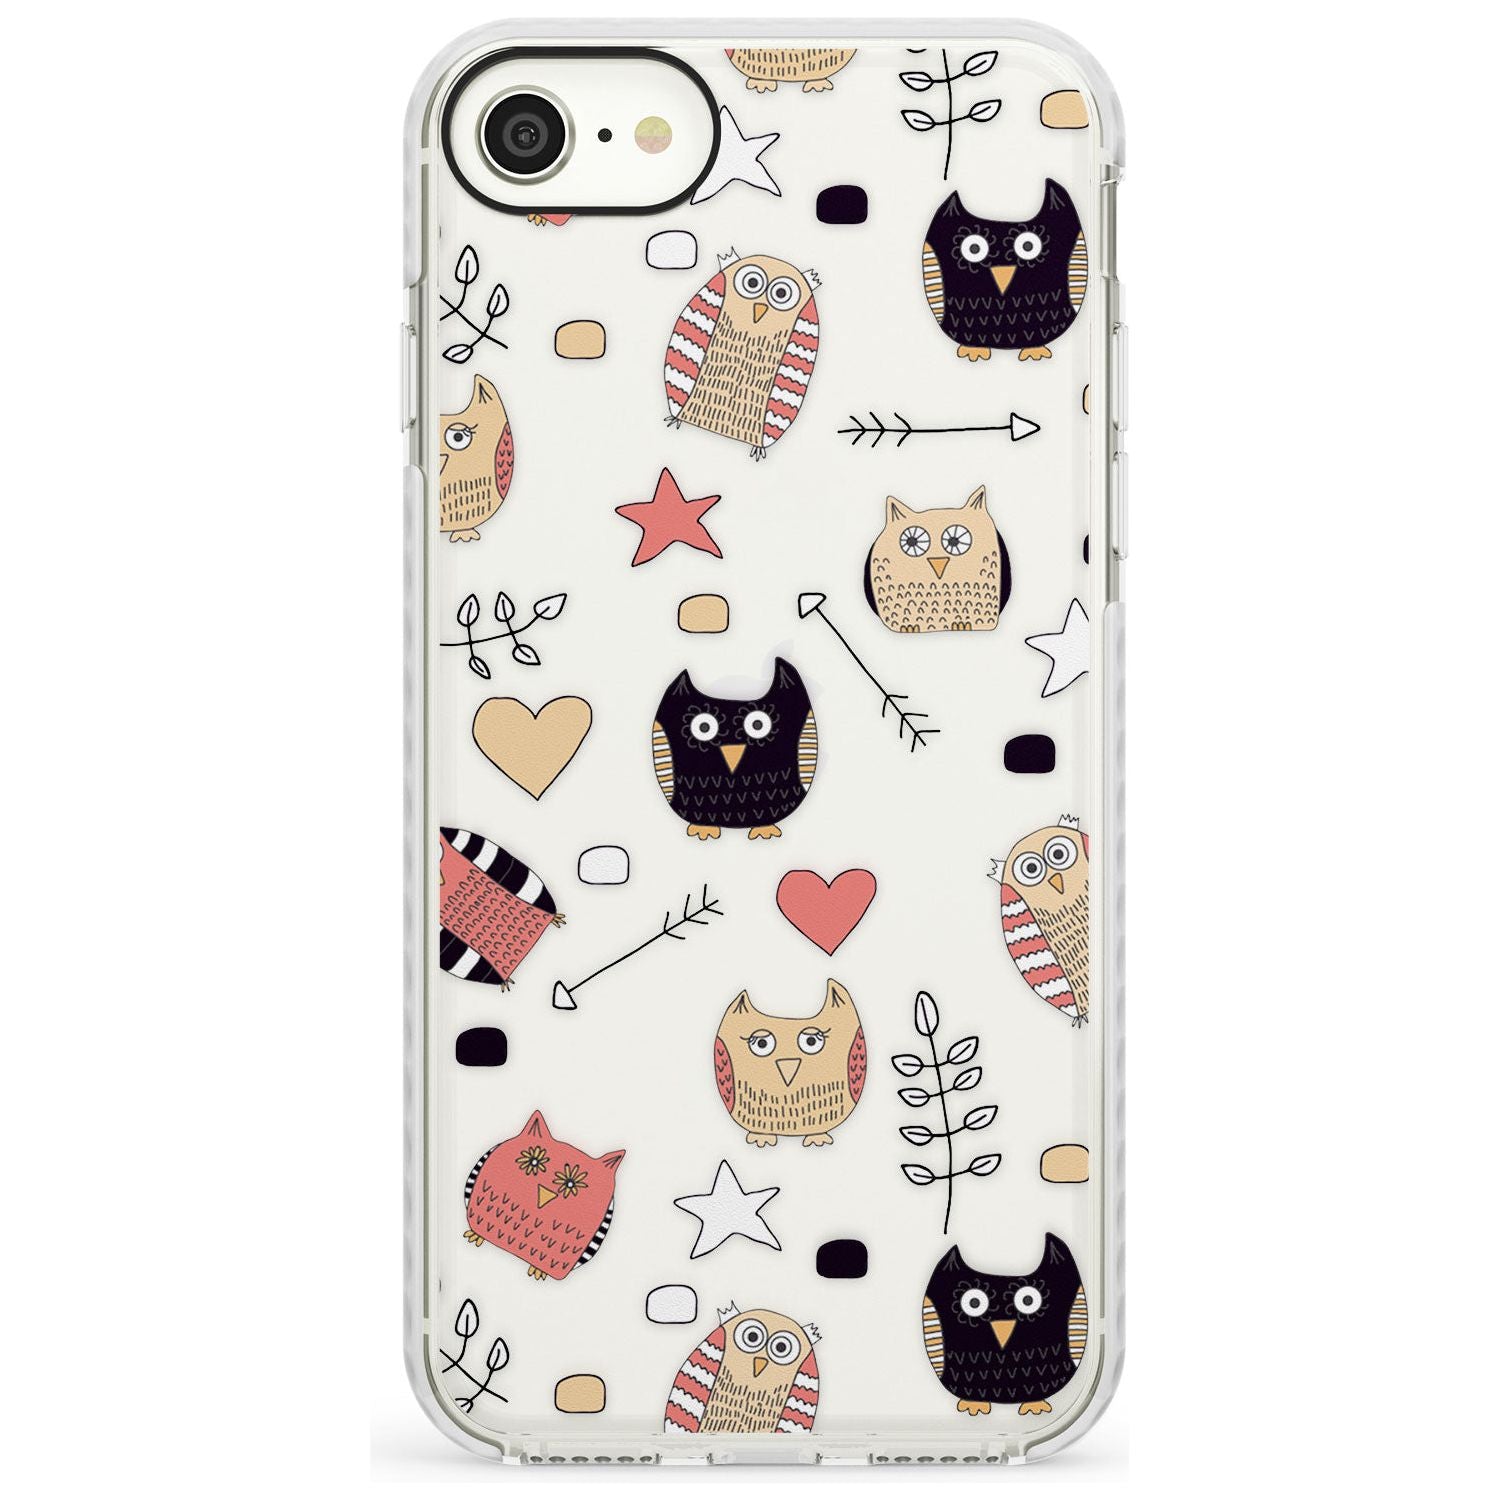 Cute Owl Pattern Impact Phone Case for iPhone SE 8 7 Plus